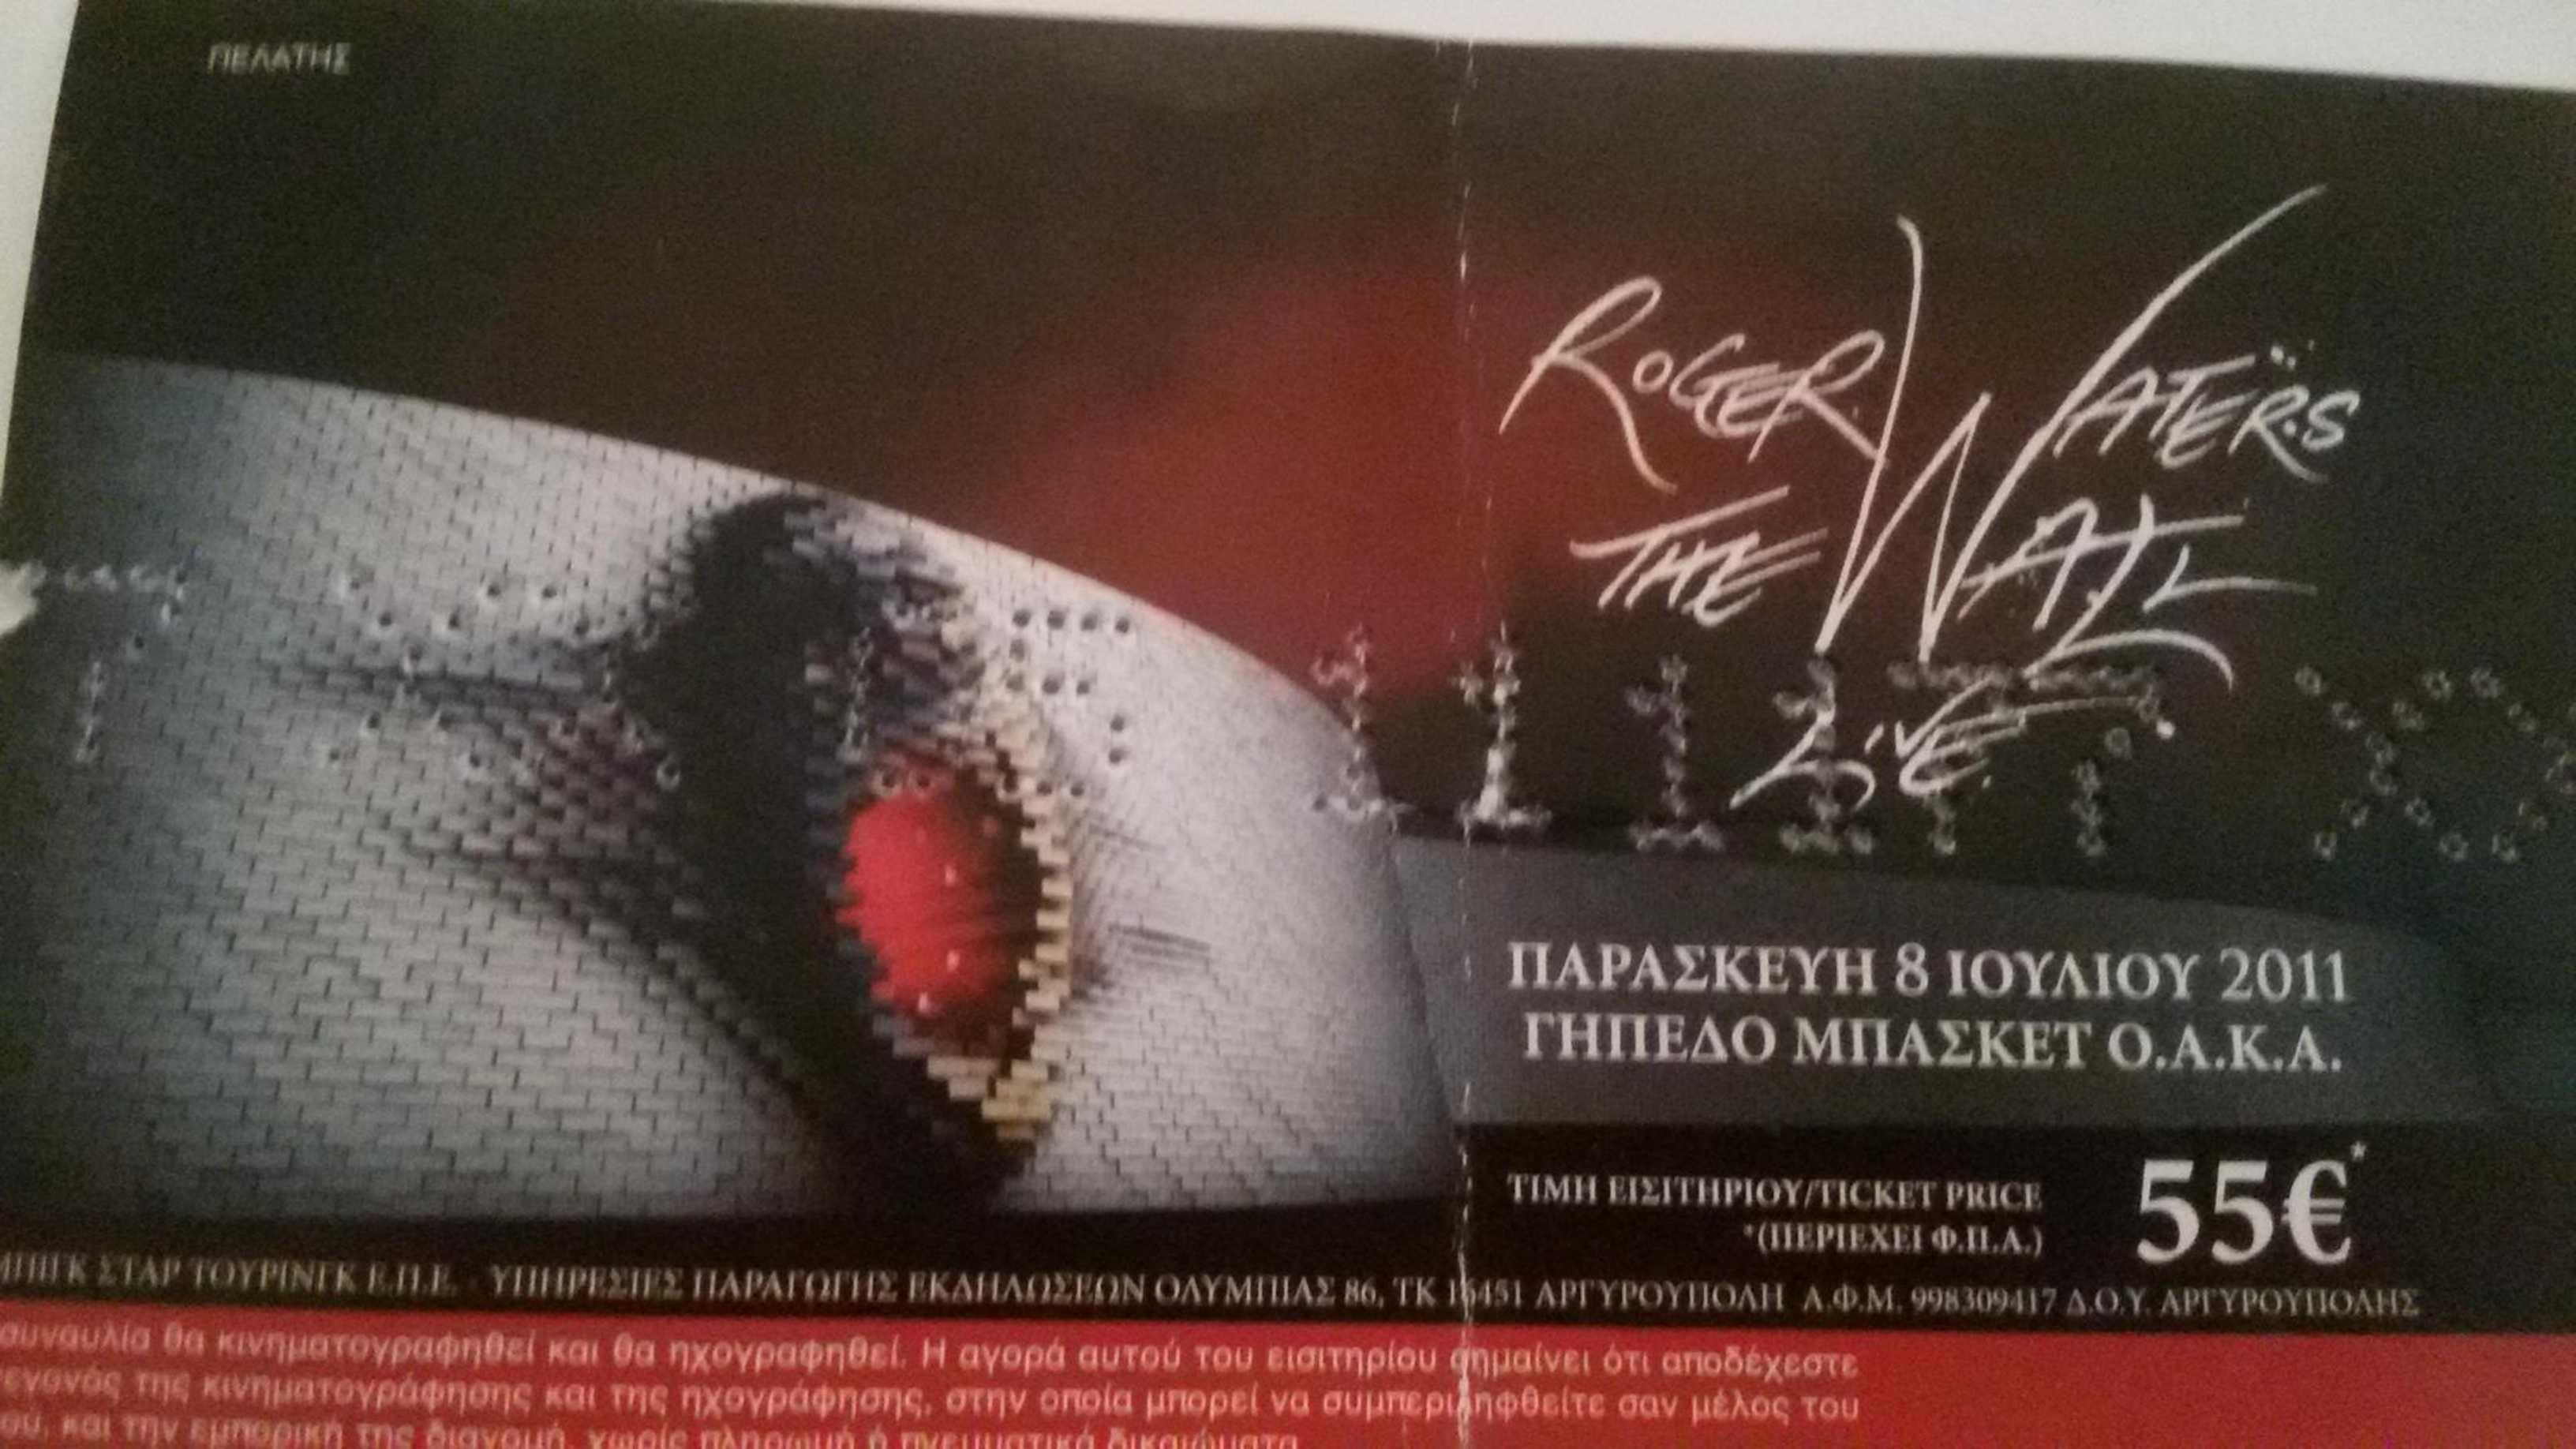 Roger Waters Ticket Athens 2011